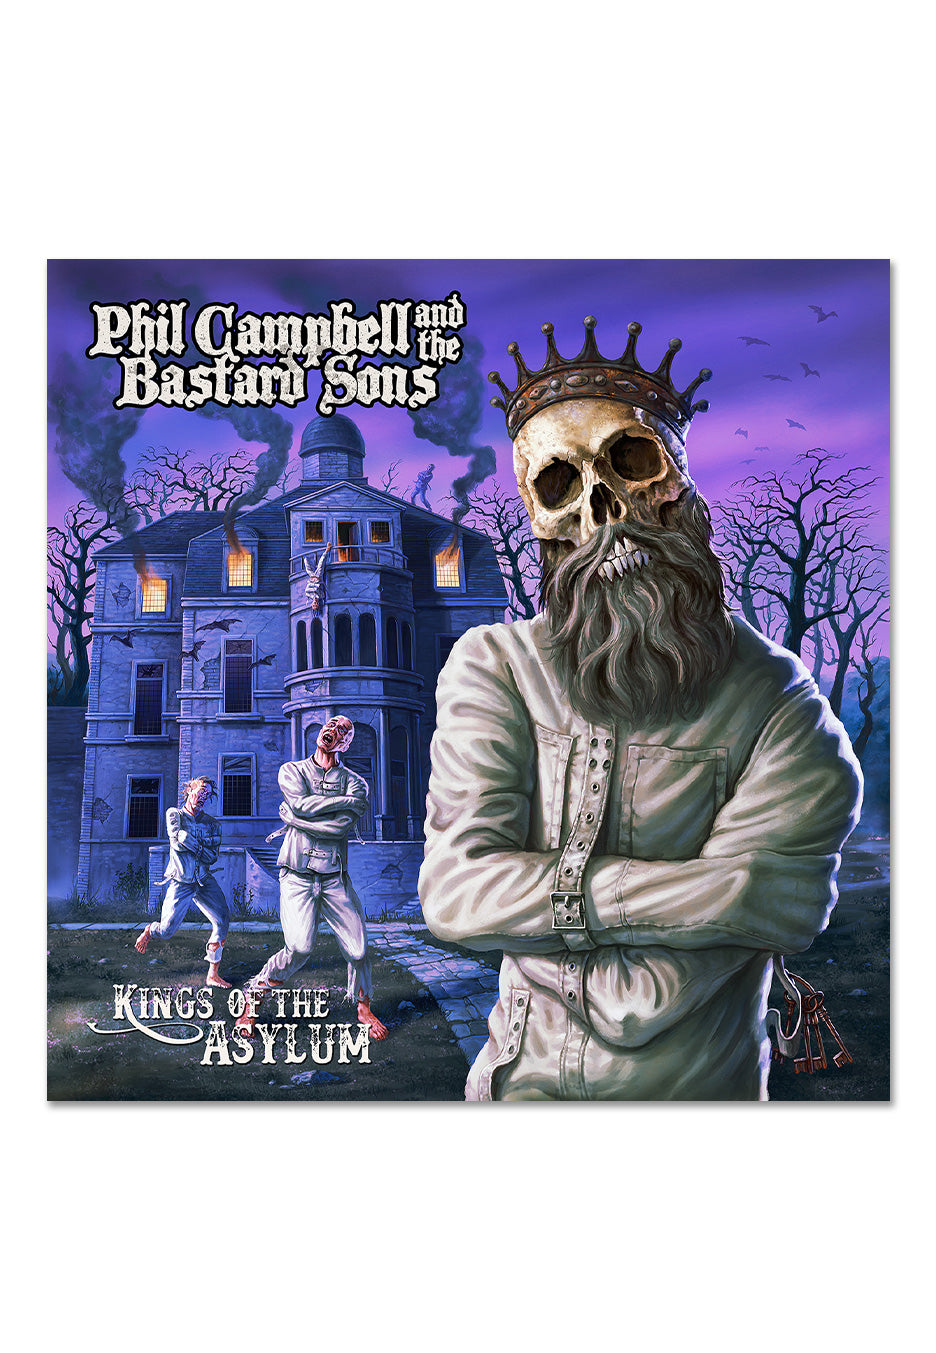 Phil Campbell And The Bastard Sons - Kings Of The Asylum - Digipack CD